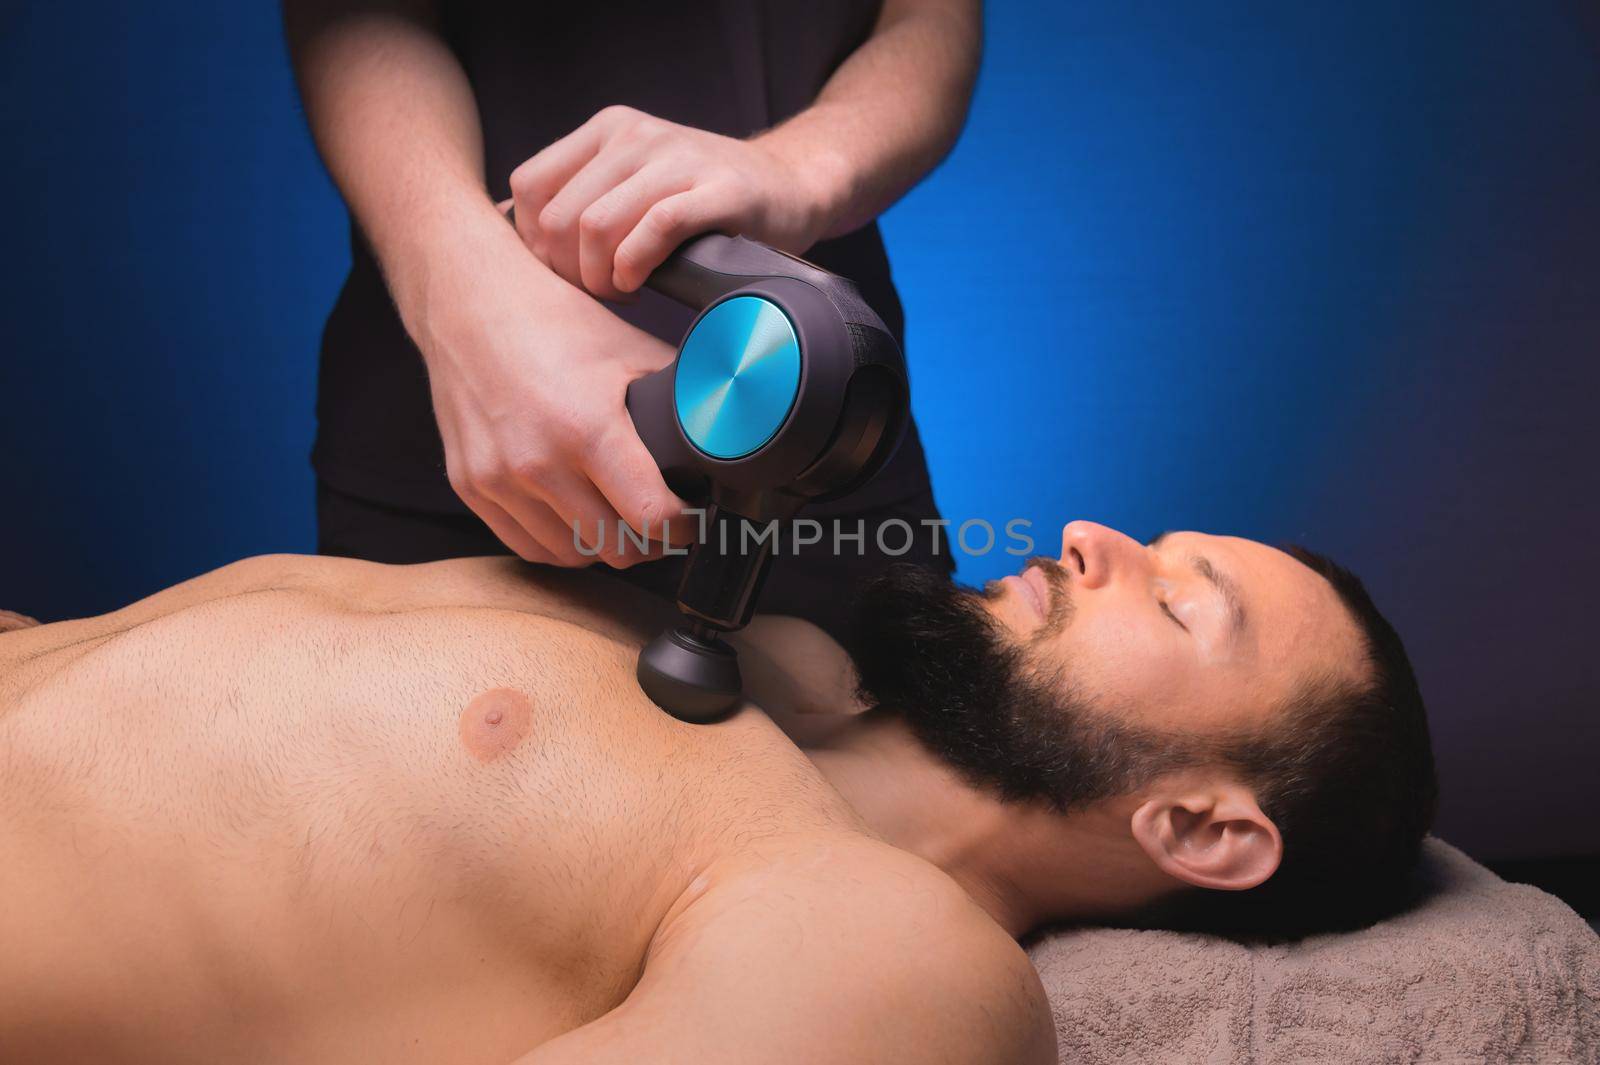 Sports percussion massage in the medical office of the gym. The masseur makes massage exercises. Percussion therapy for regenerating sports body massage. Sports injury rehabilitation concepts